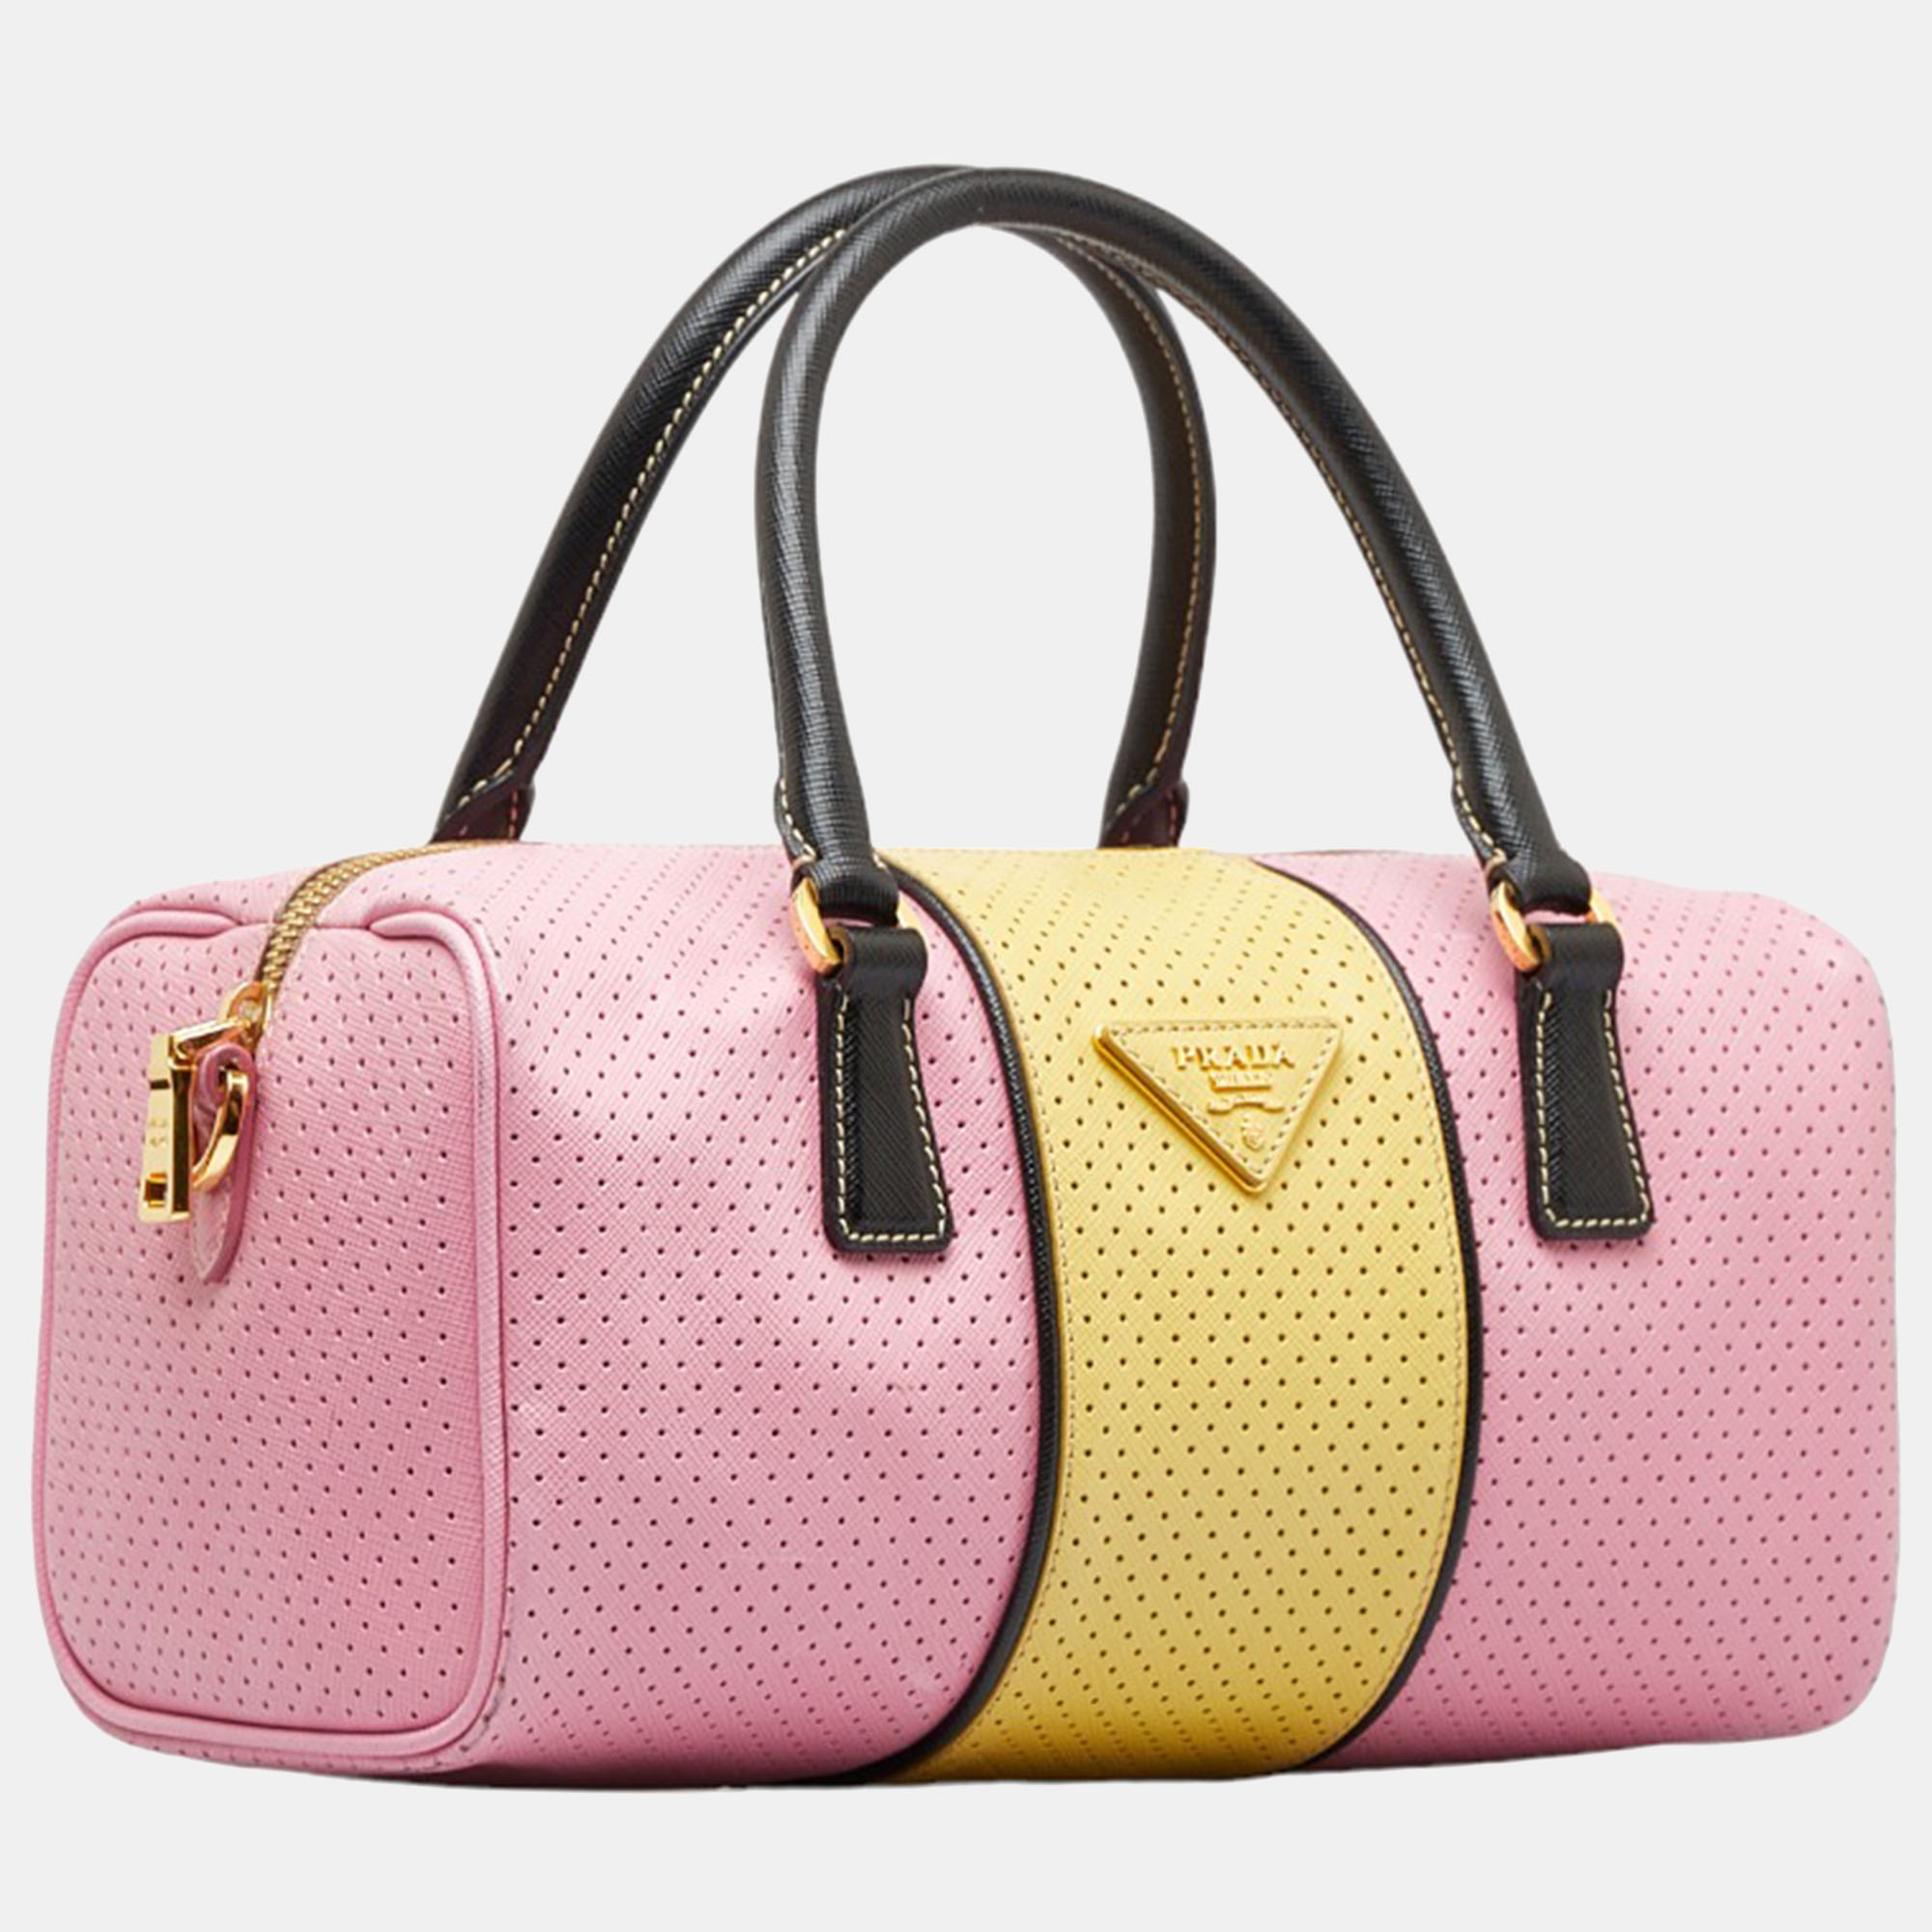 

Prada Pink/Yellow Perforated Leather Lux Bauletto Boston Bag